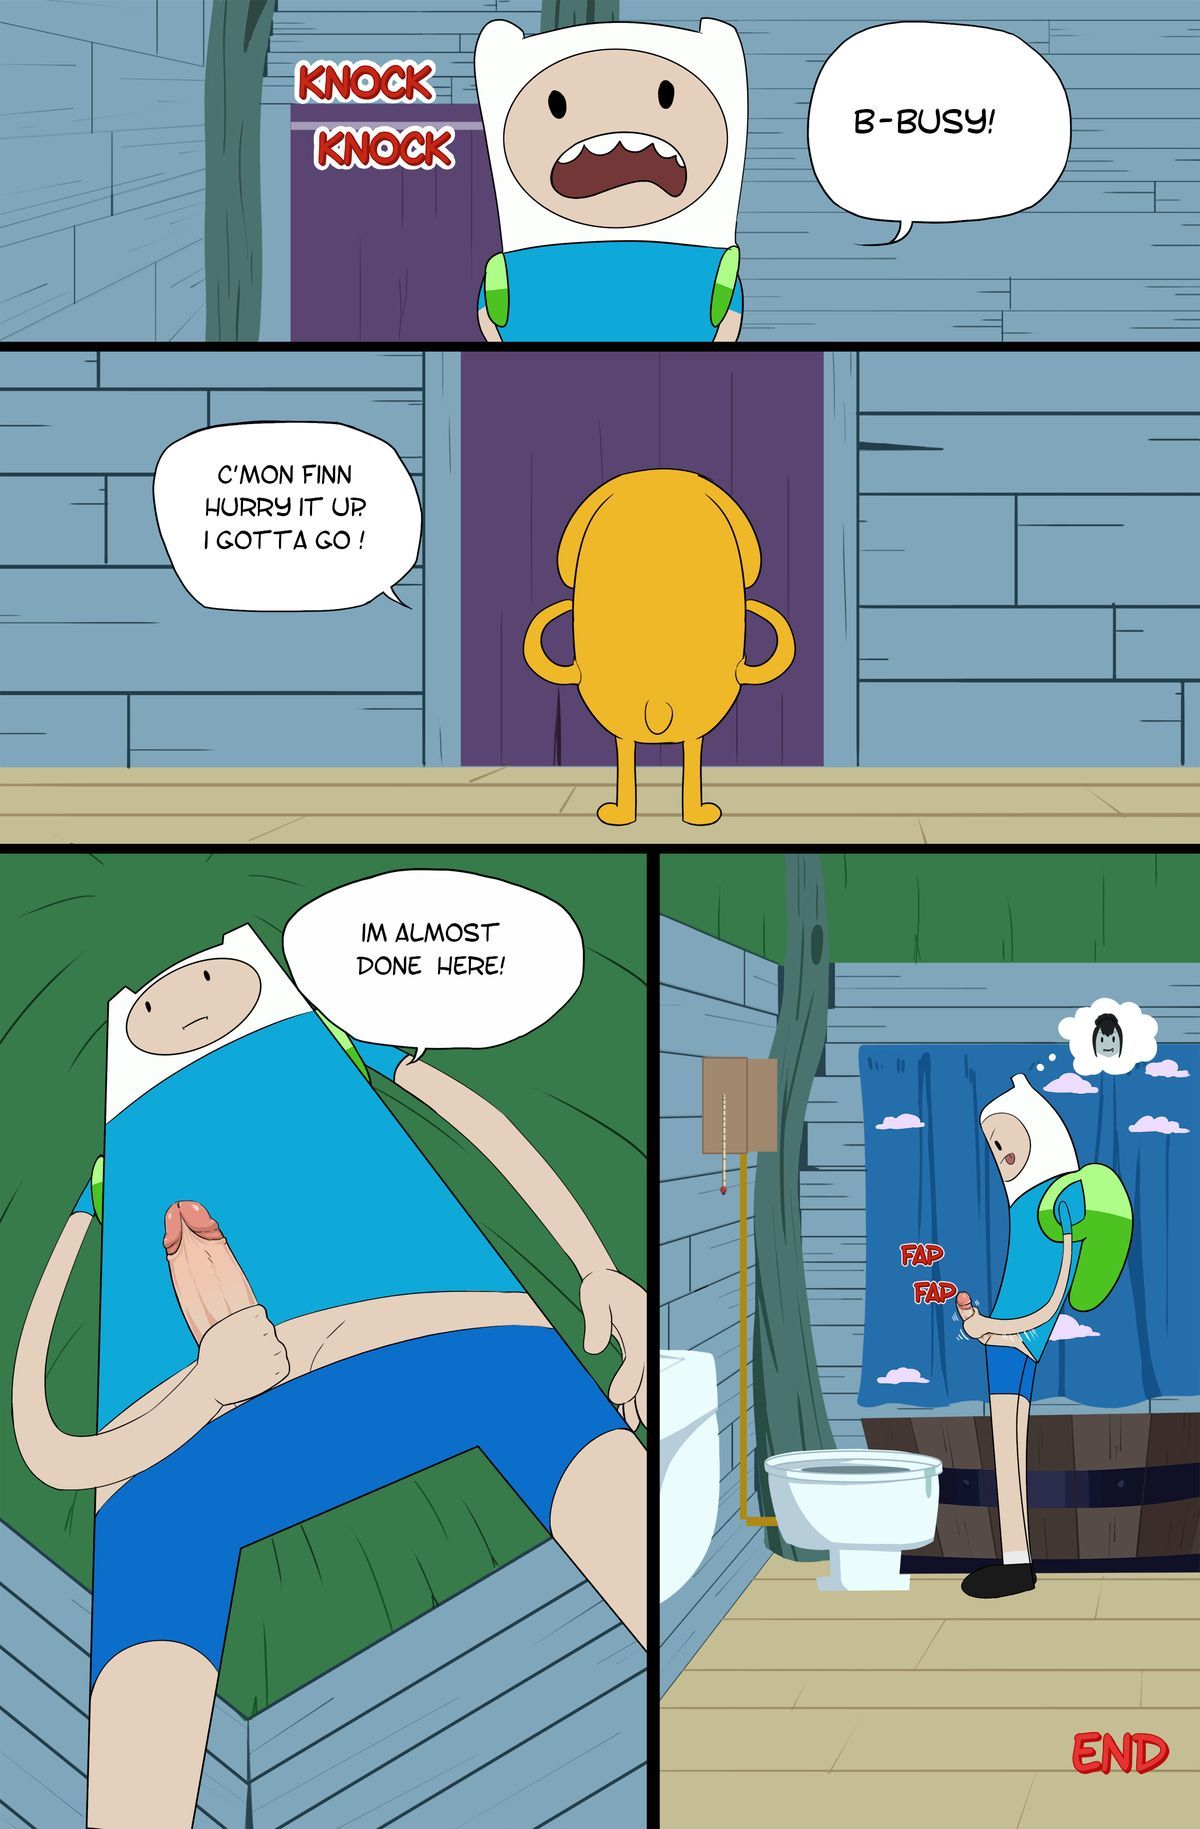 [Dipdoodle]_Adventure_Time_-_Desire_For_the_Color_Lust comix_59942.jpg